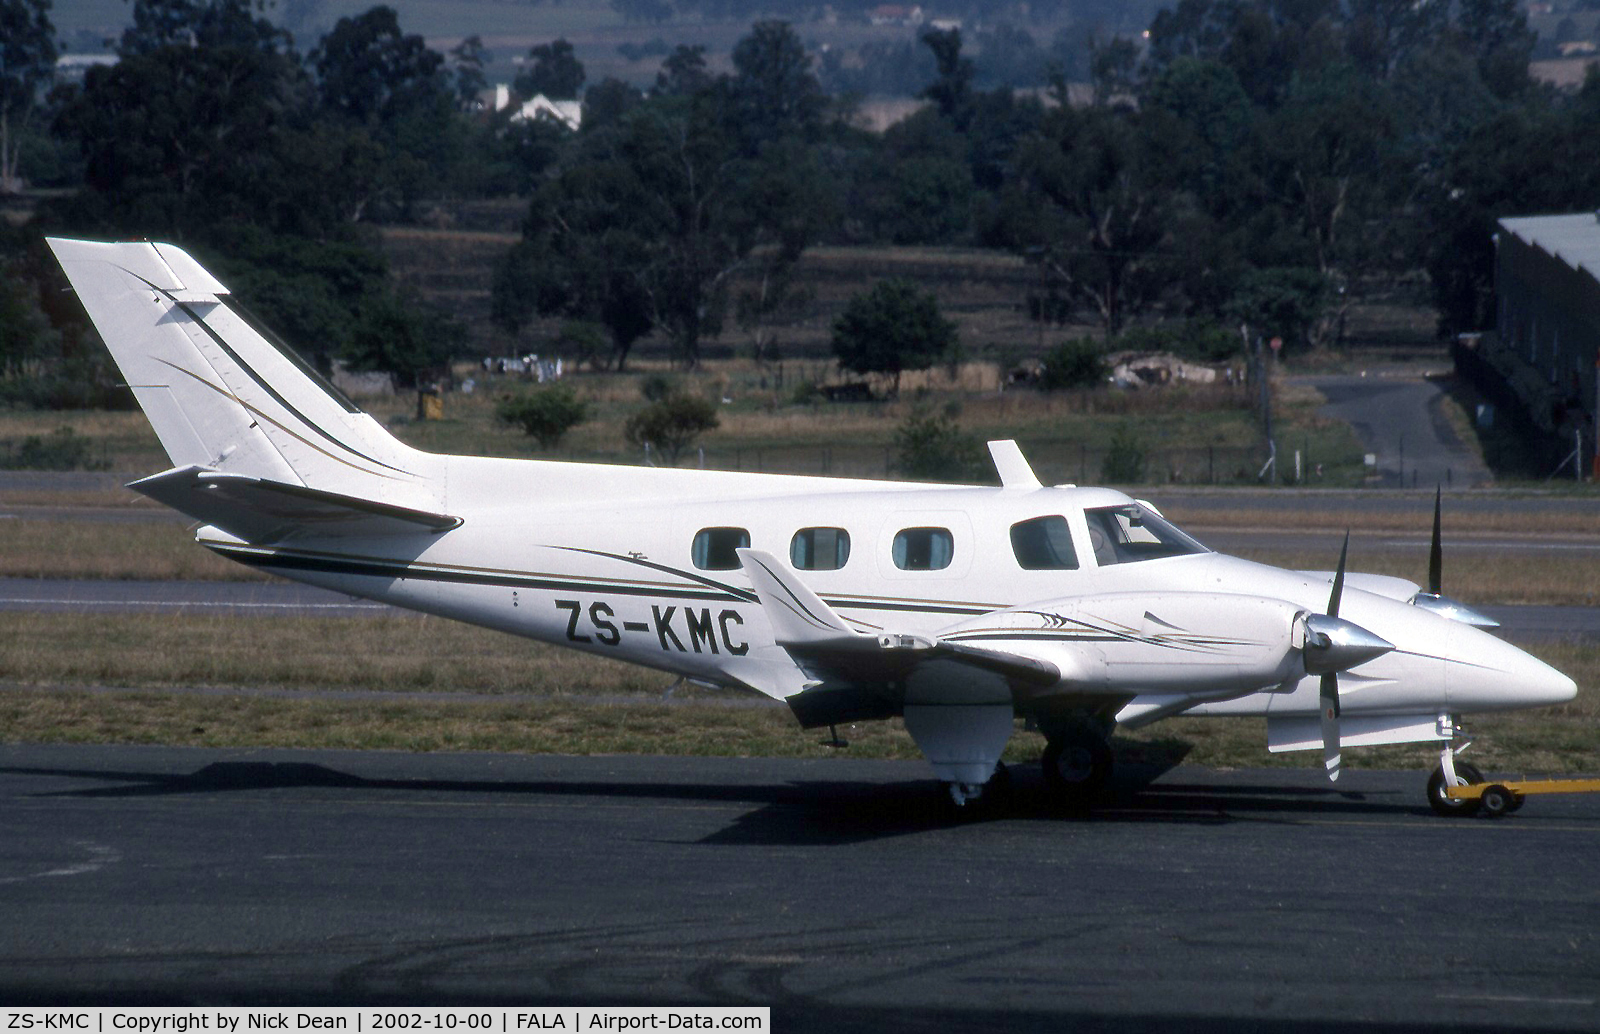 ZS-KMC, 1974 Beech B-60 Duke C/N P-286, Lanseria a great drome and going down there on Saturday again for 10 days